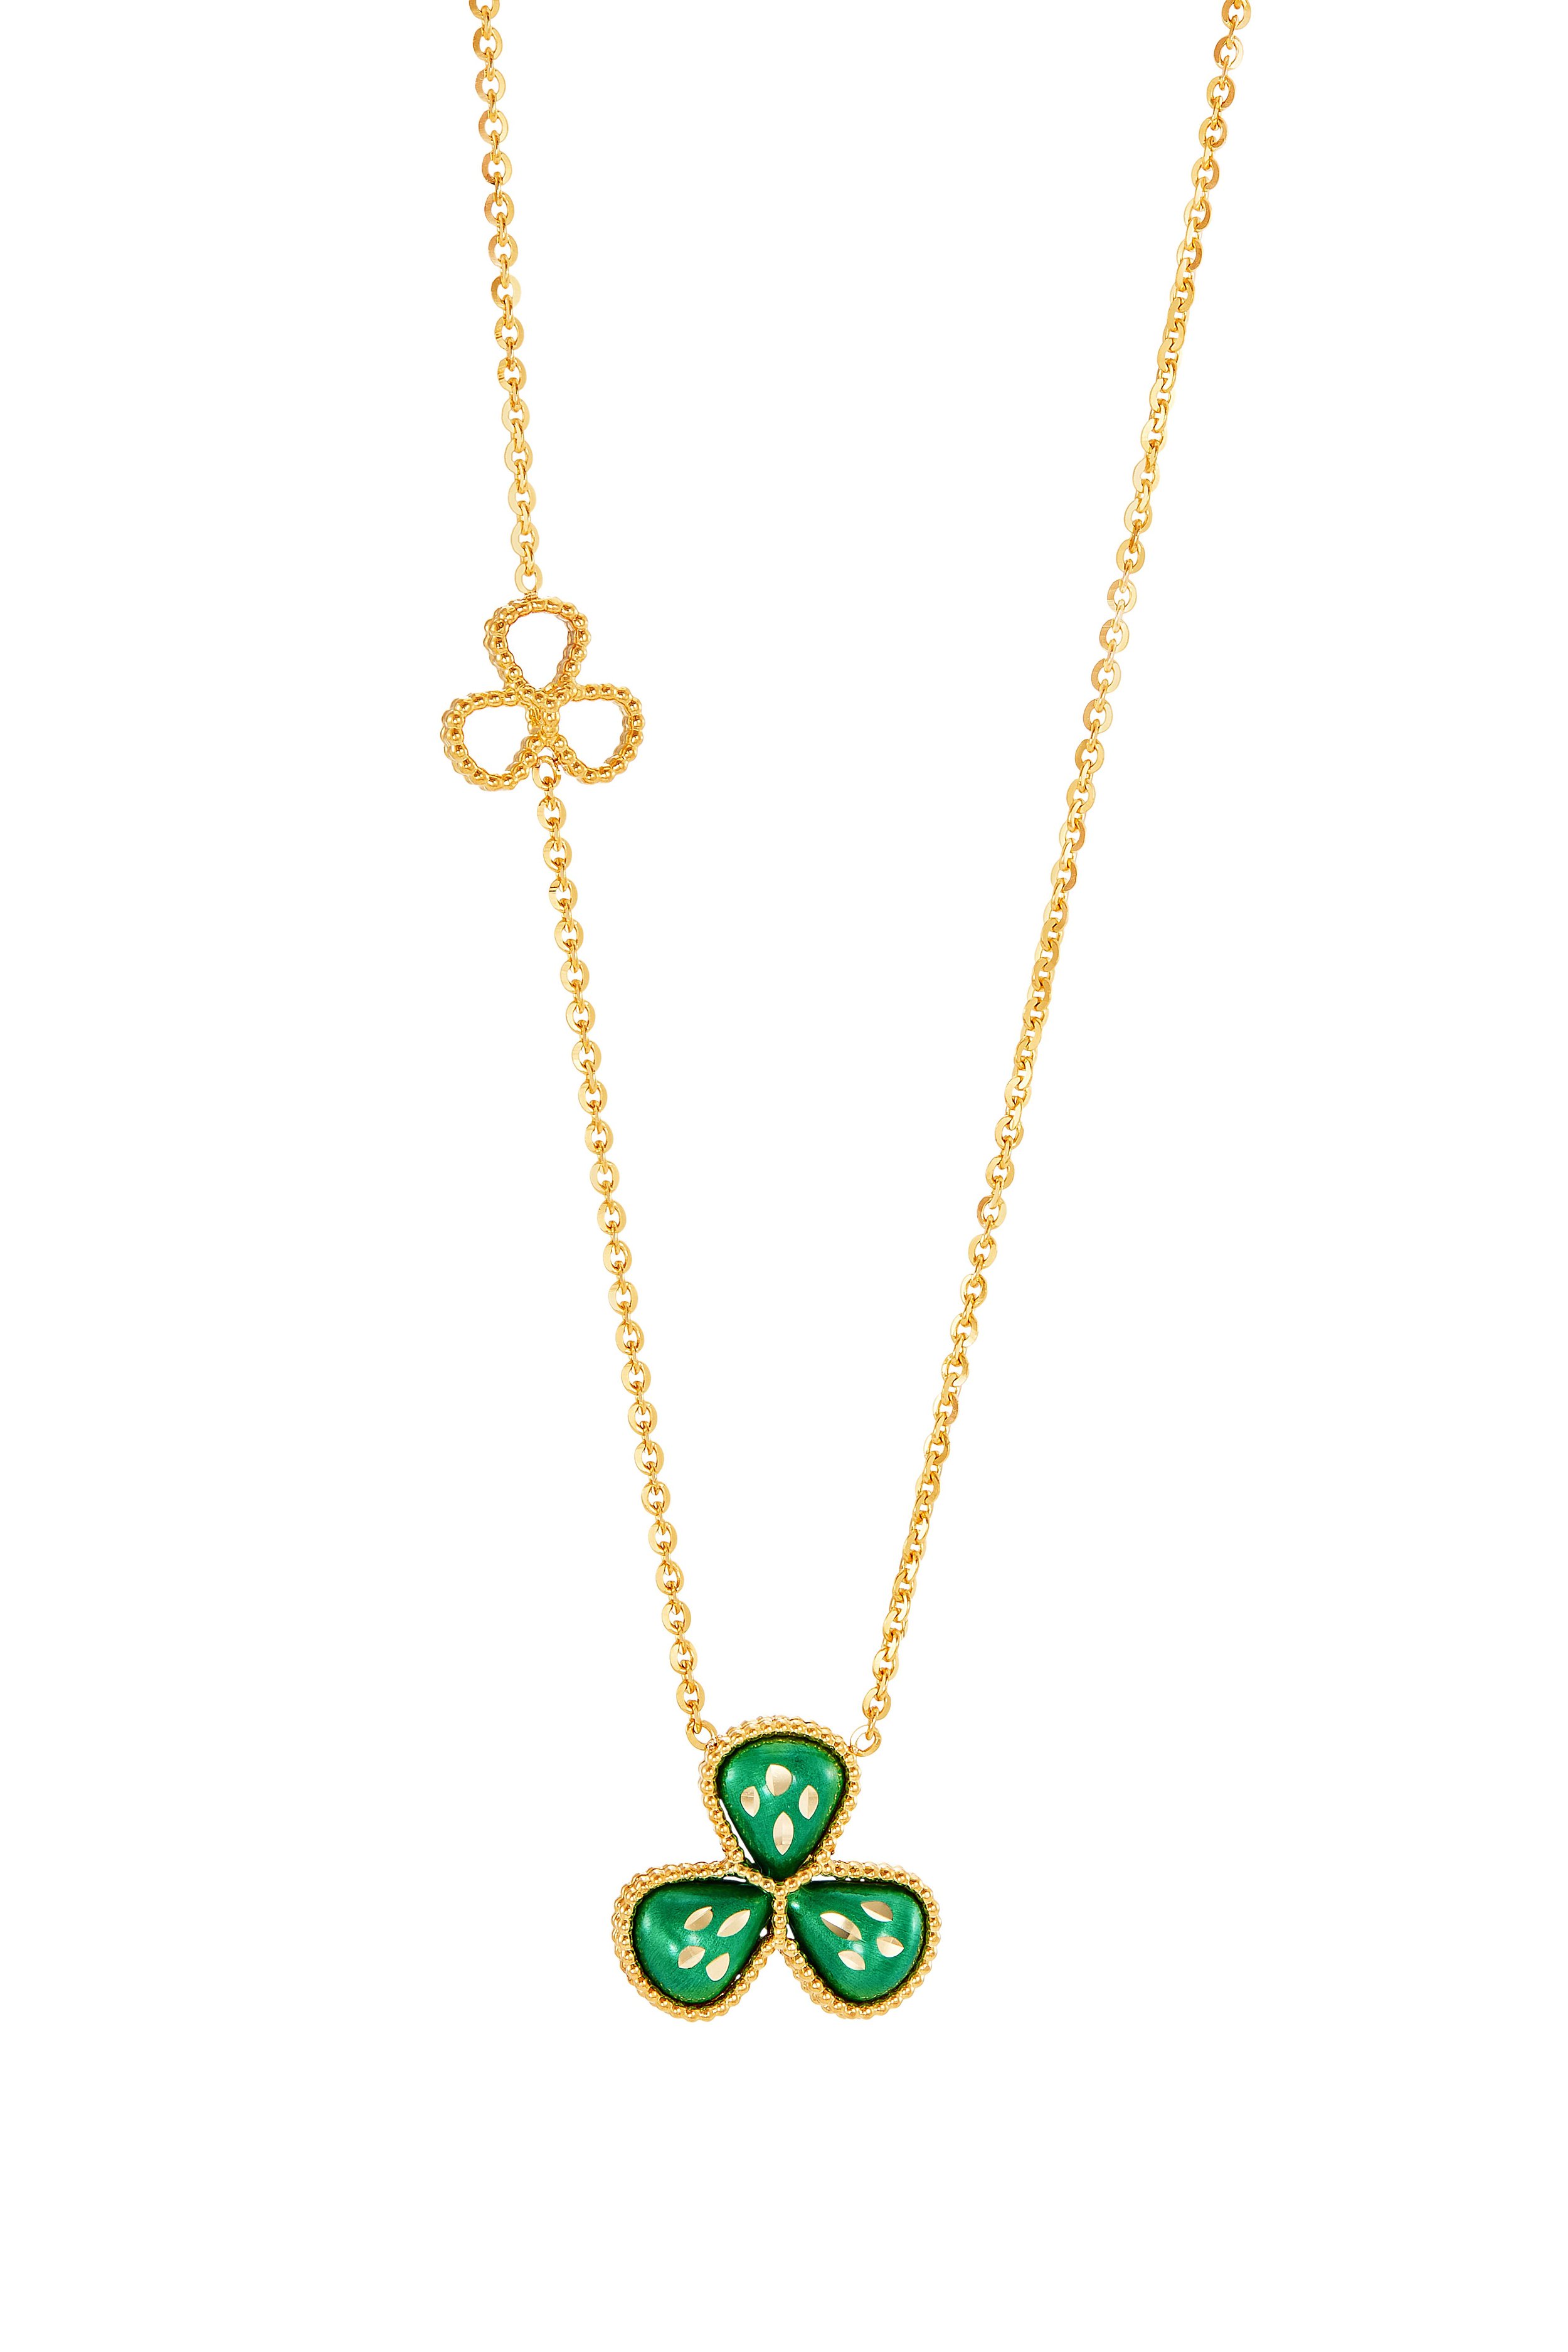 Viola Necklace in Green, Turquoise and Yellow Gold 1.jpg